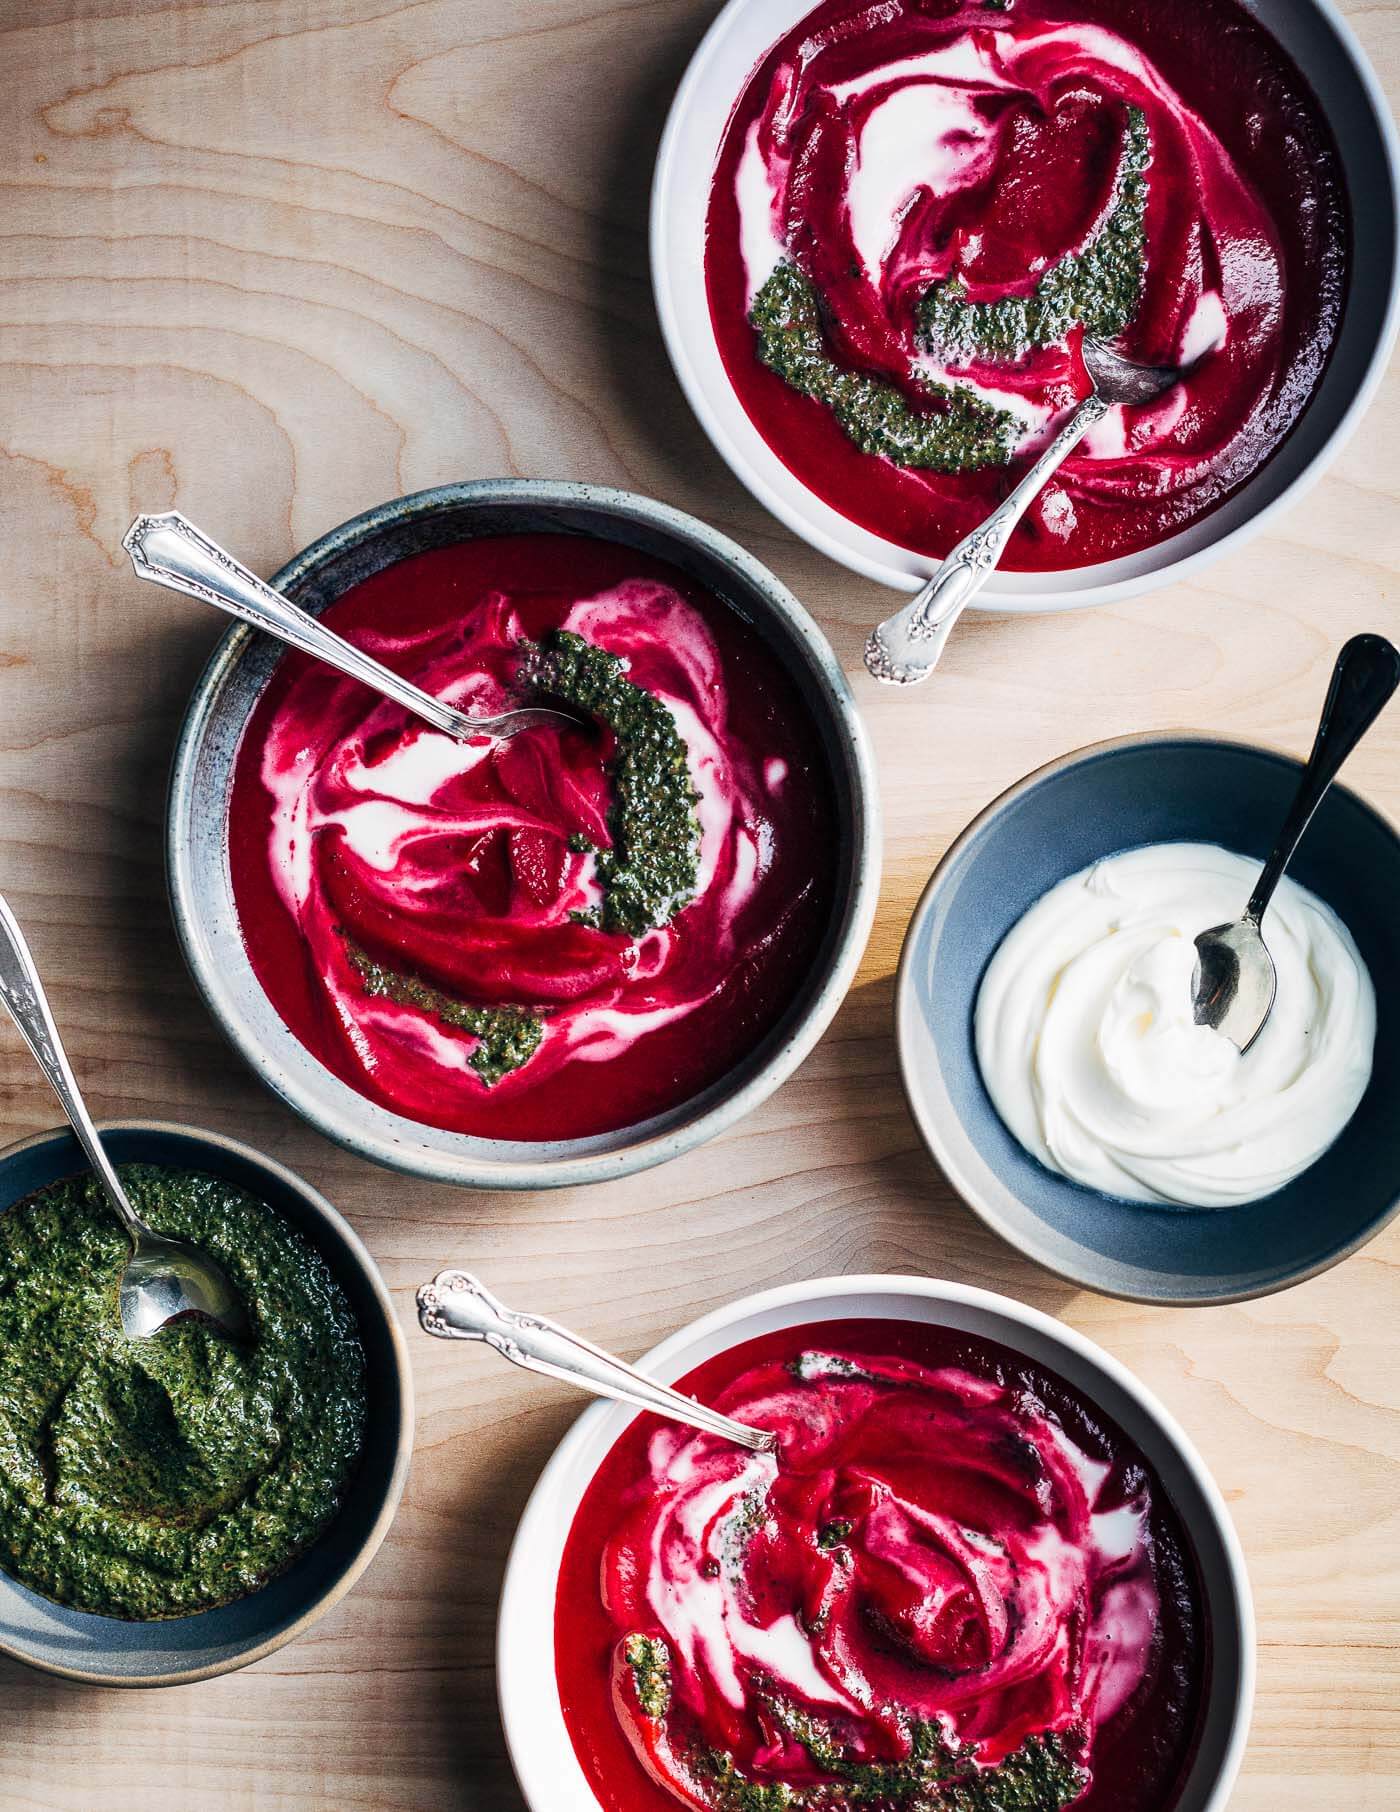 A vibrant root-to-leaf beet soup recipe that's swirled with crème fraîche and beet green pistou. Colorful, earthy, and wonderfully savory, this beet soup is an early spring delight.